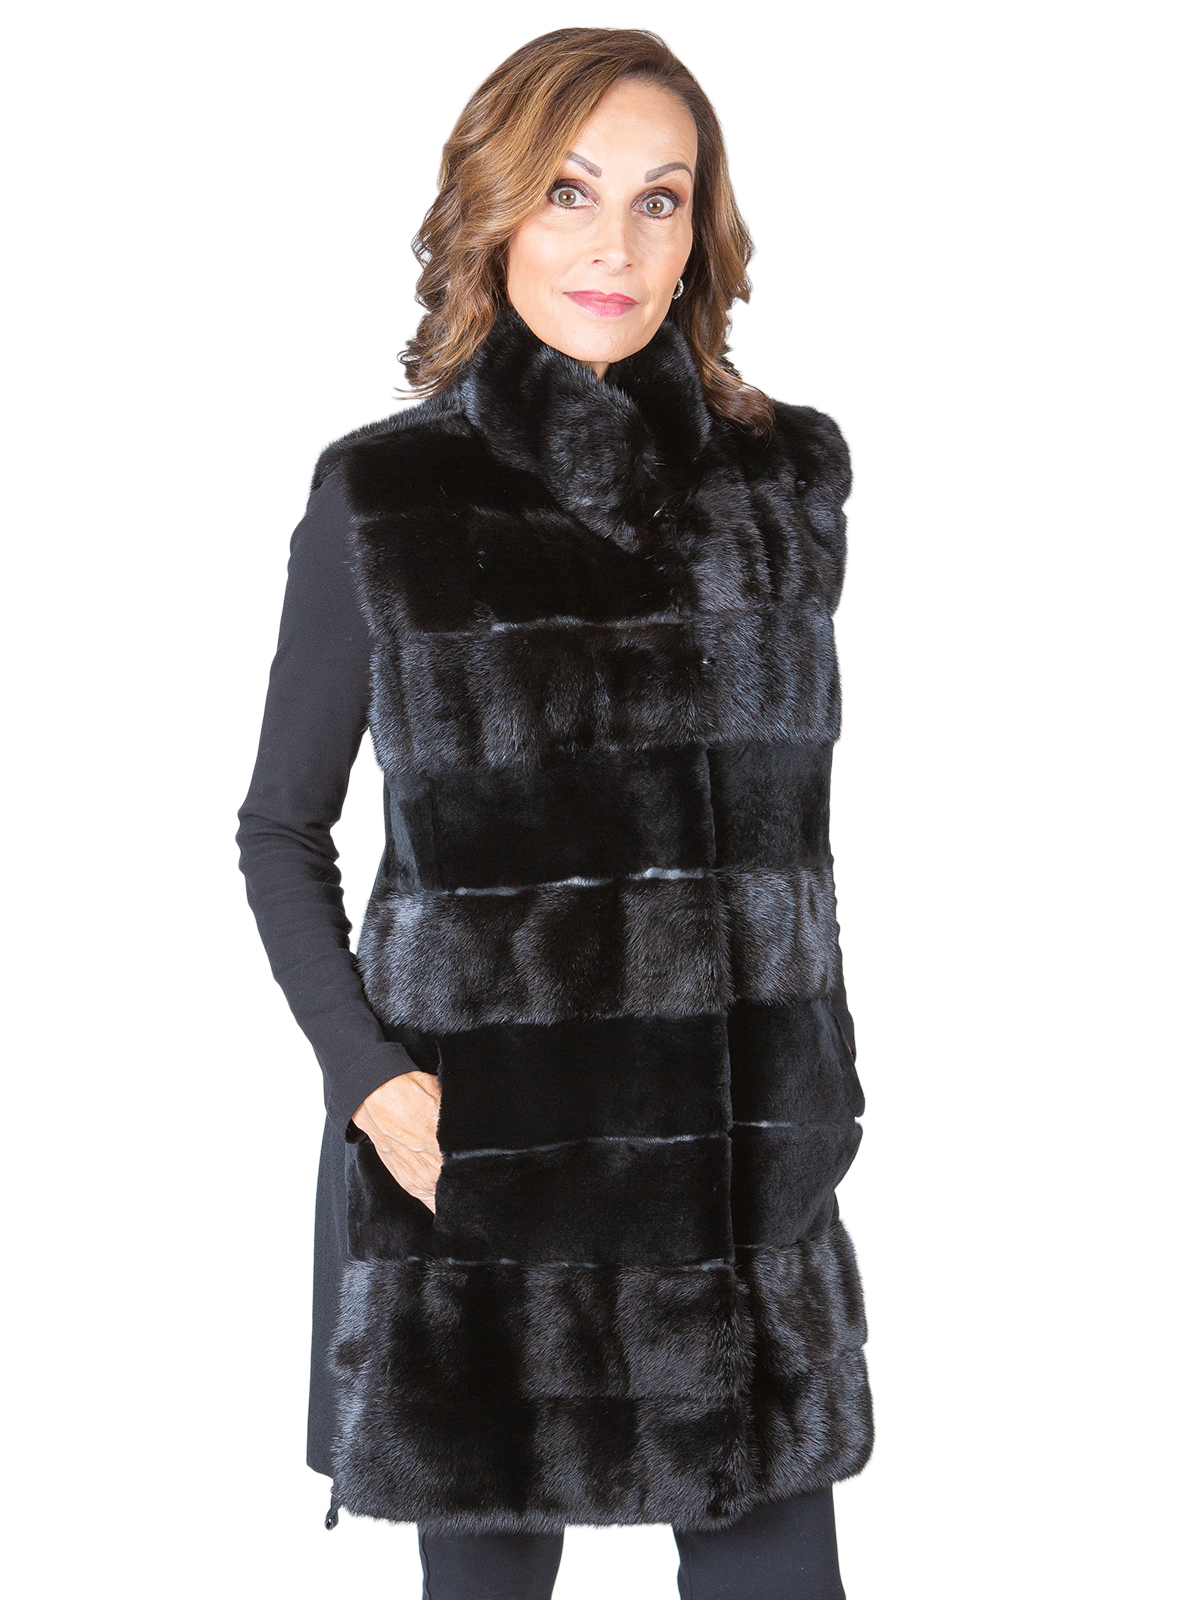 Woman's Black Sheared Mink Vest with Cashmere Back